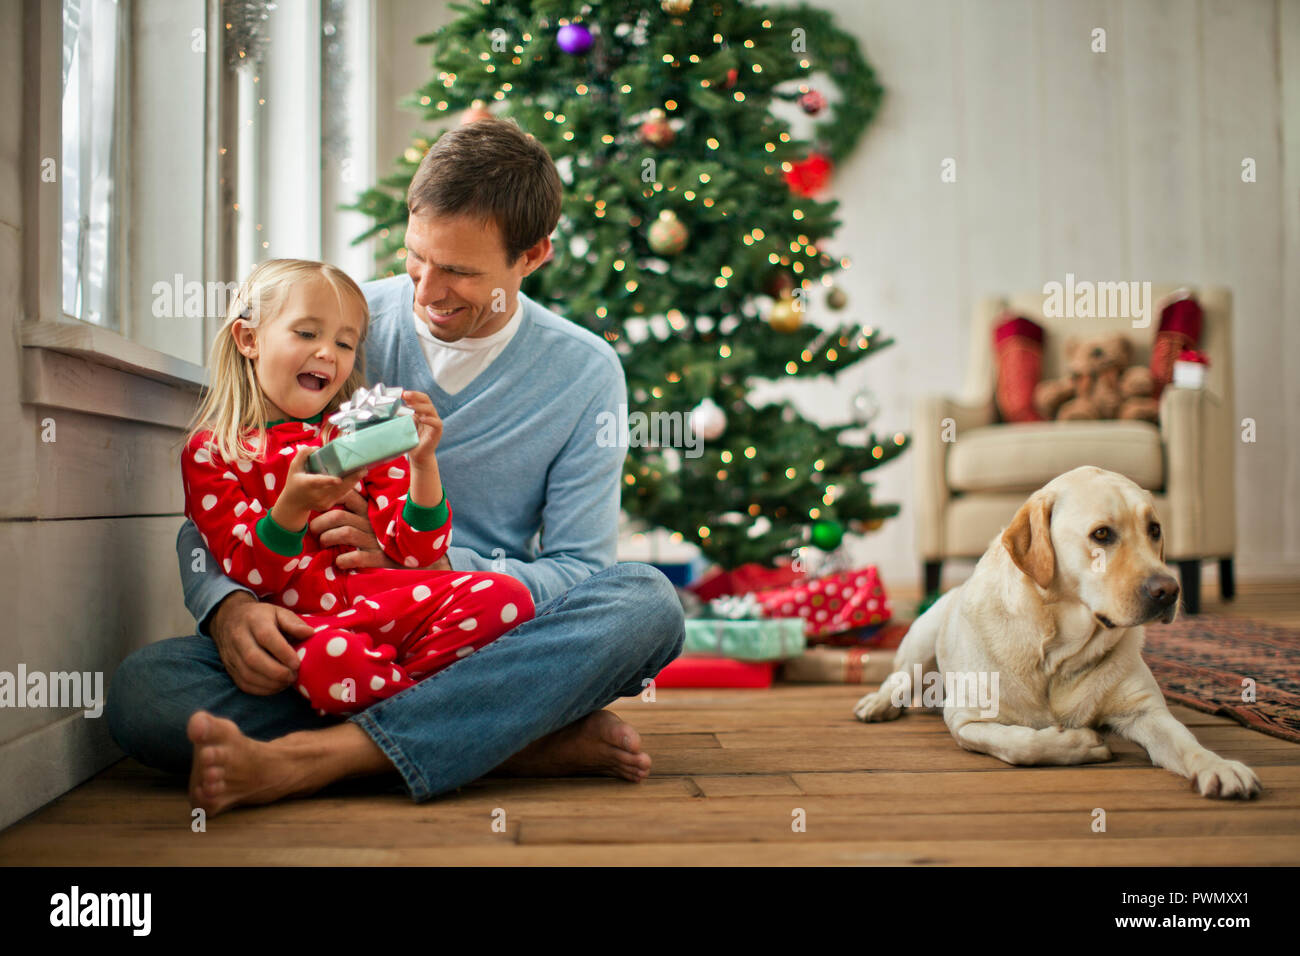 Father and daughter opening gifts on Christmas day. Stock Photo